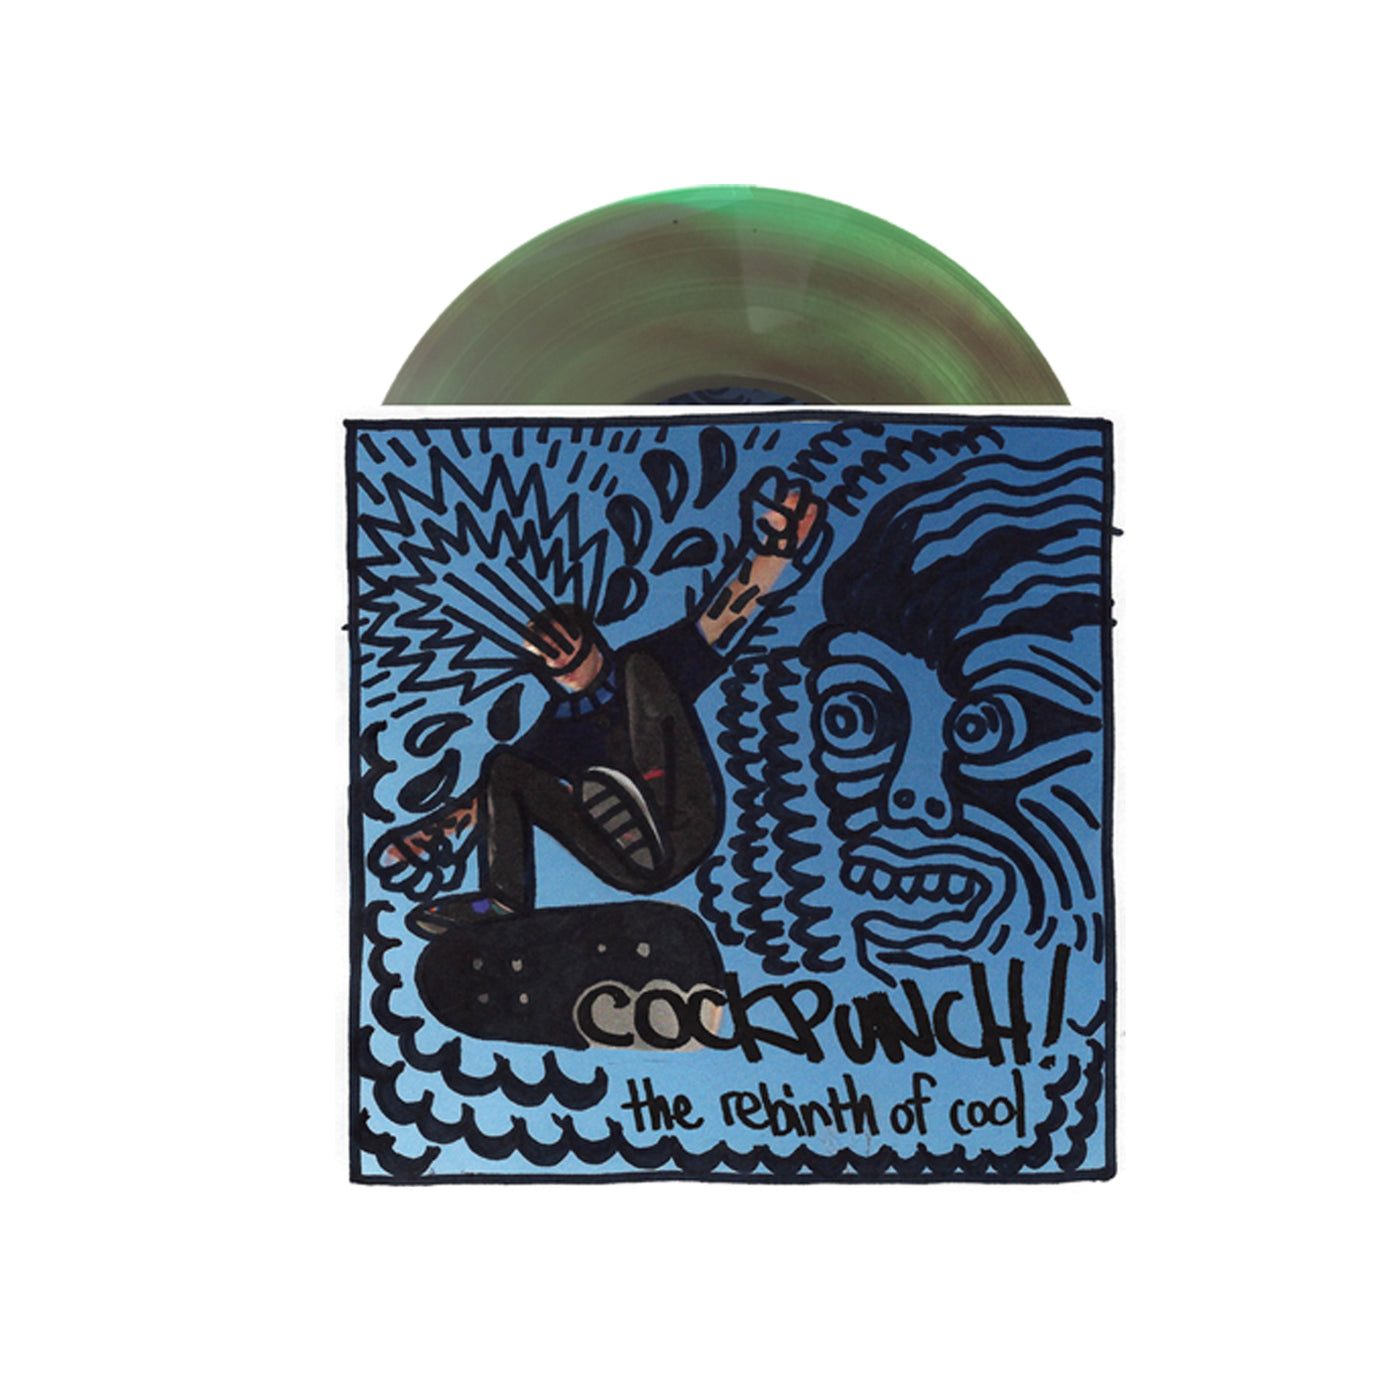 The Rebirth Of Cool Brown In Green 7" Vinyl